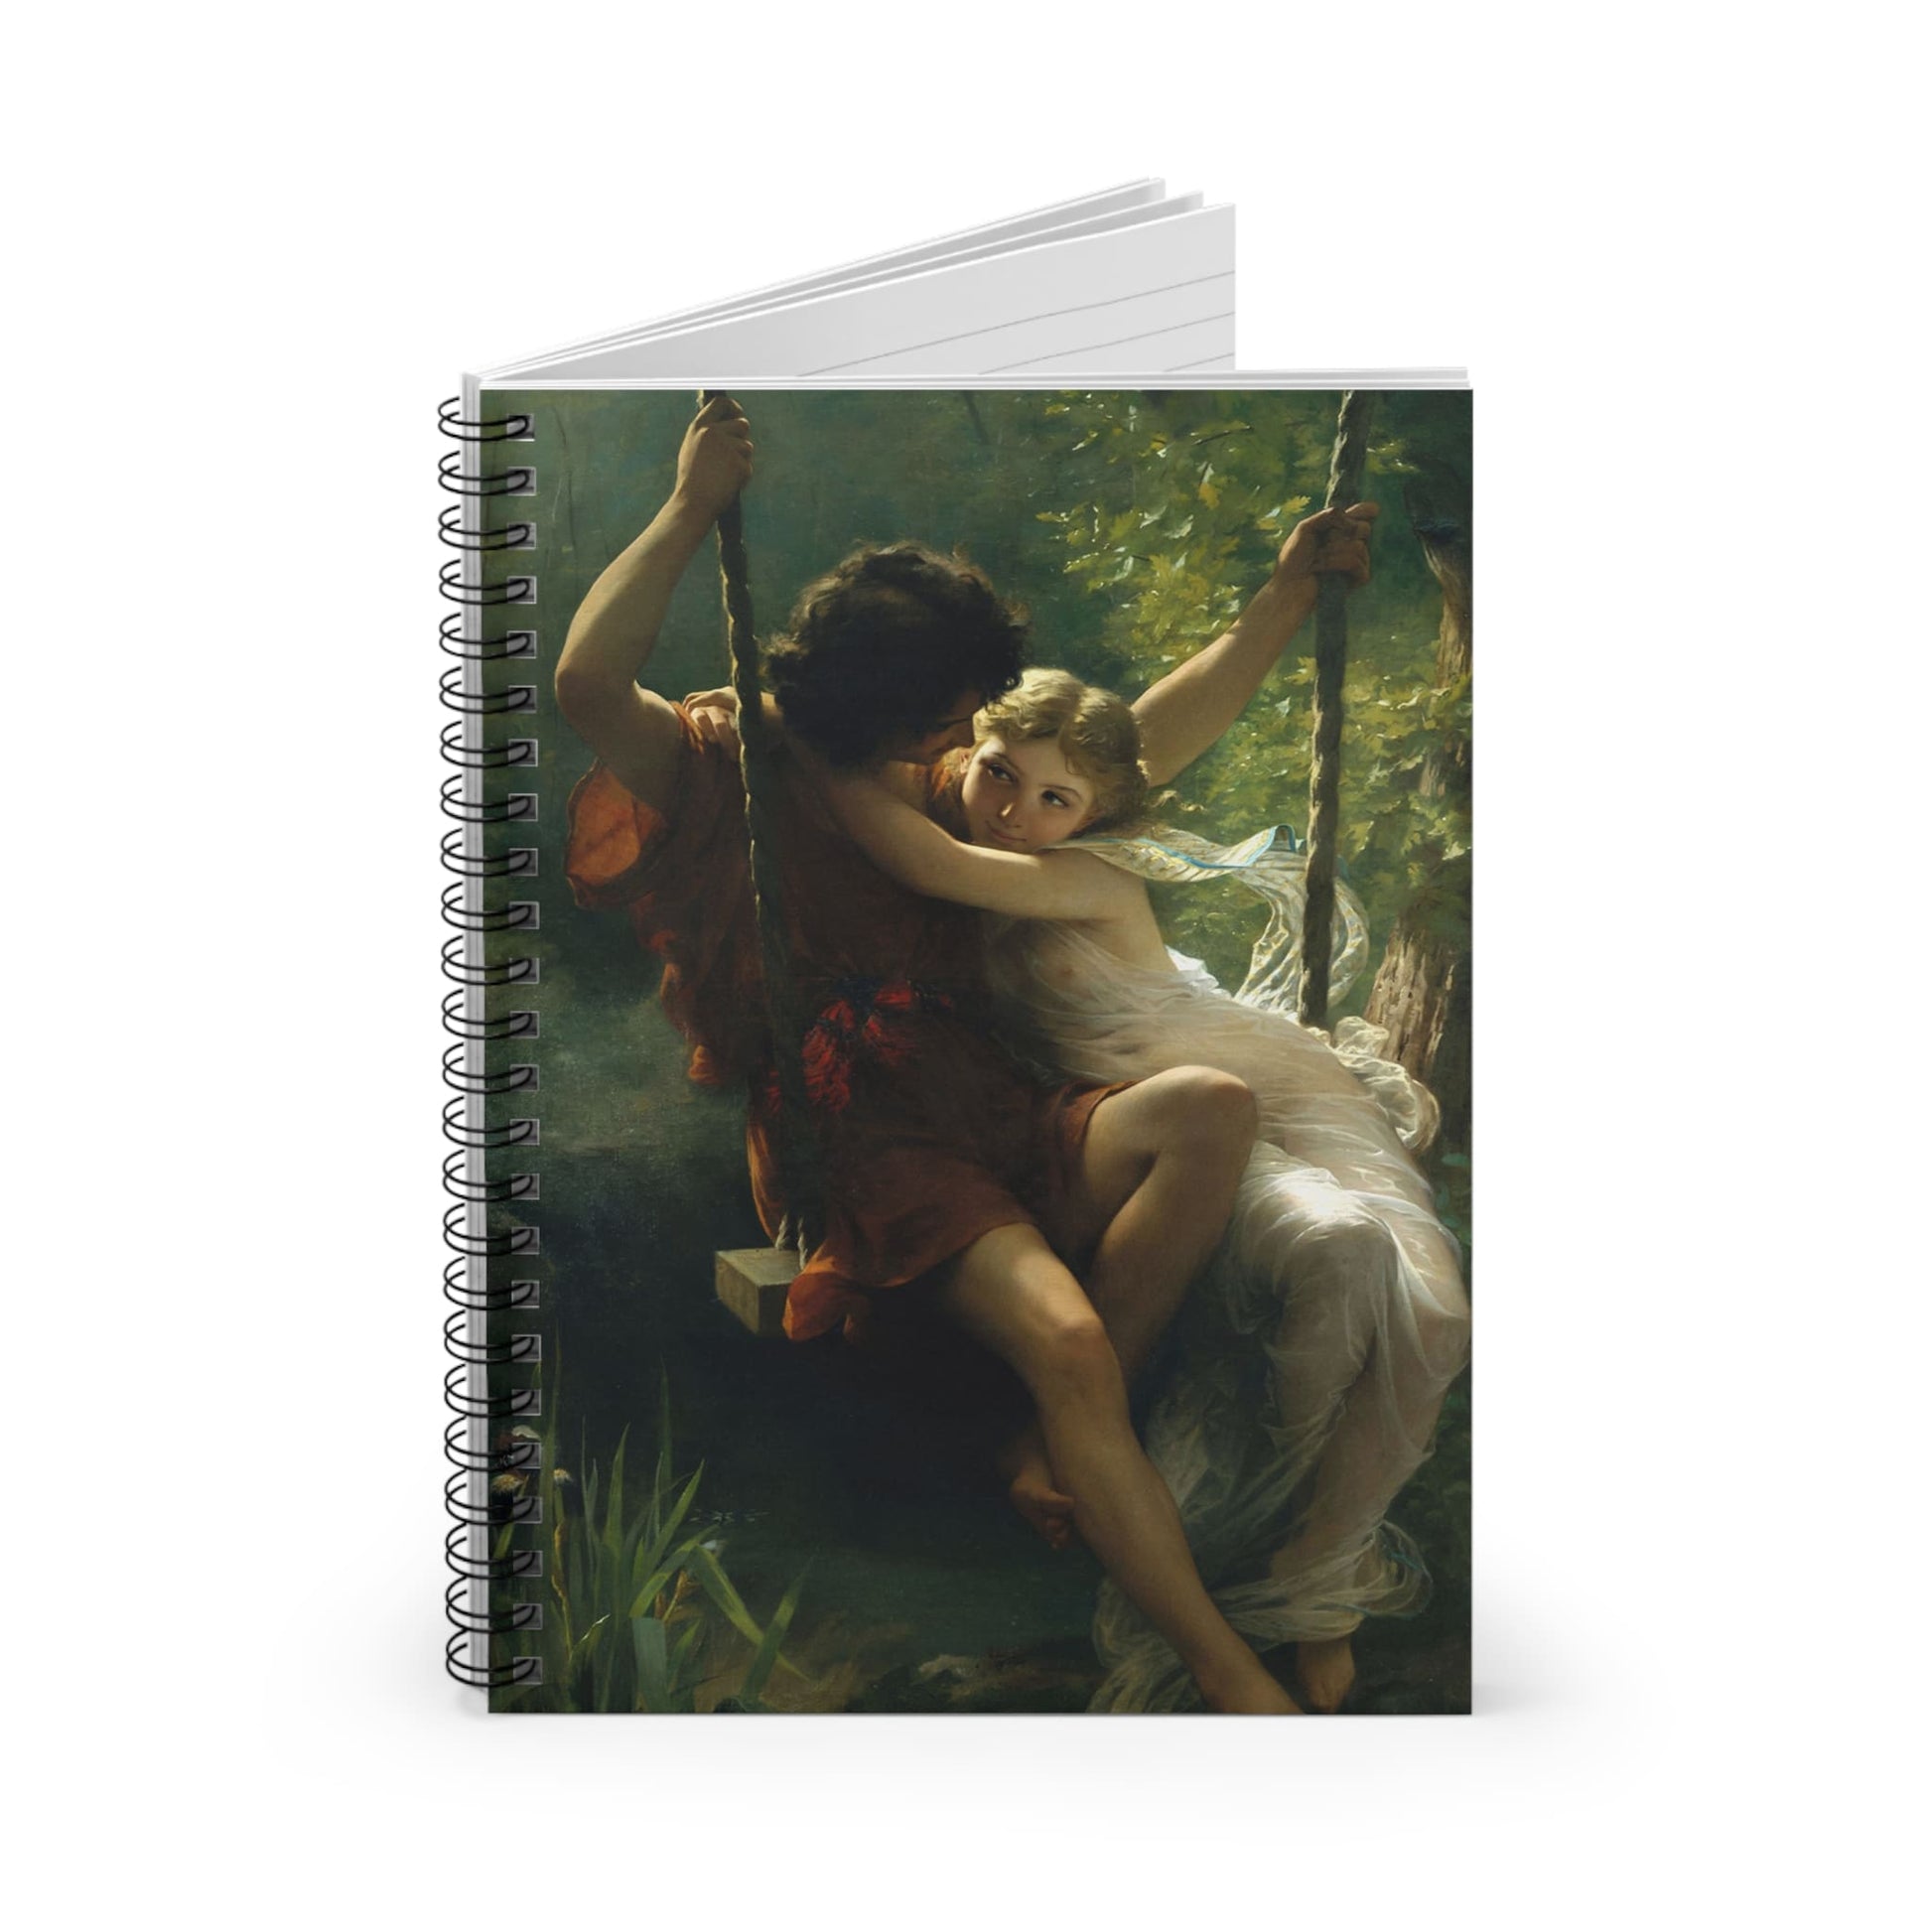 Lovers on a Swing Spiral Notebook Standing up on White Desk